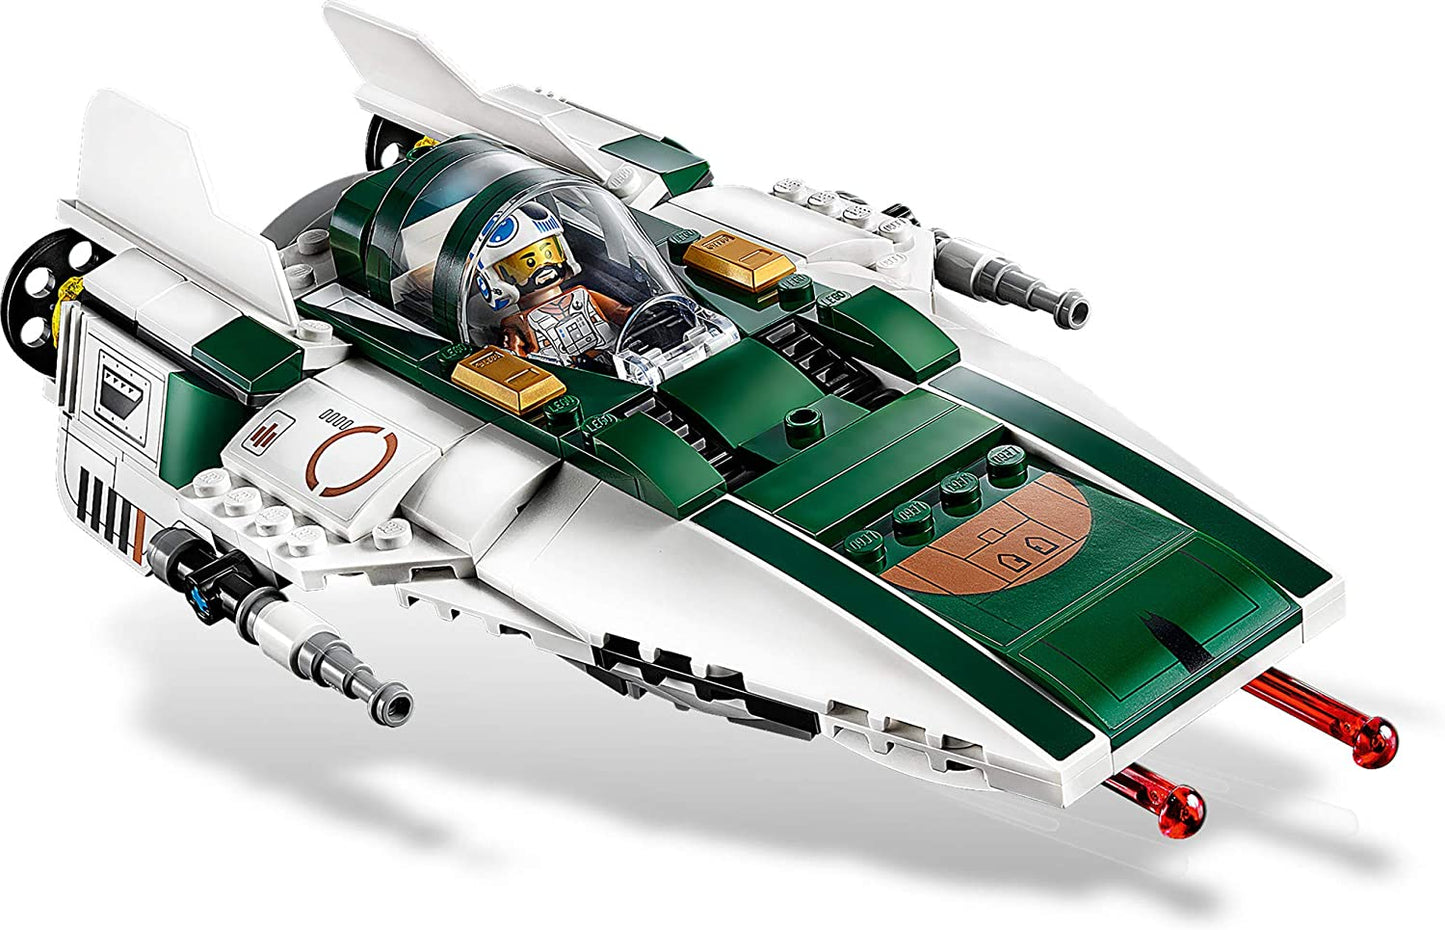 LEGO Star Wars - Resistance A Wing Starfighter 75248